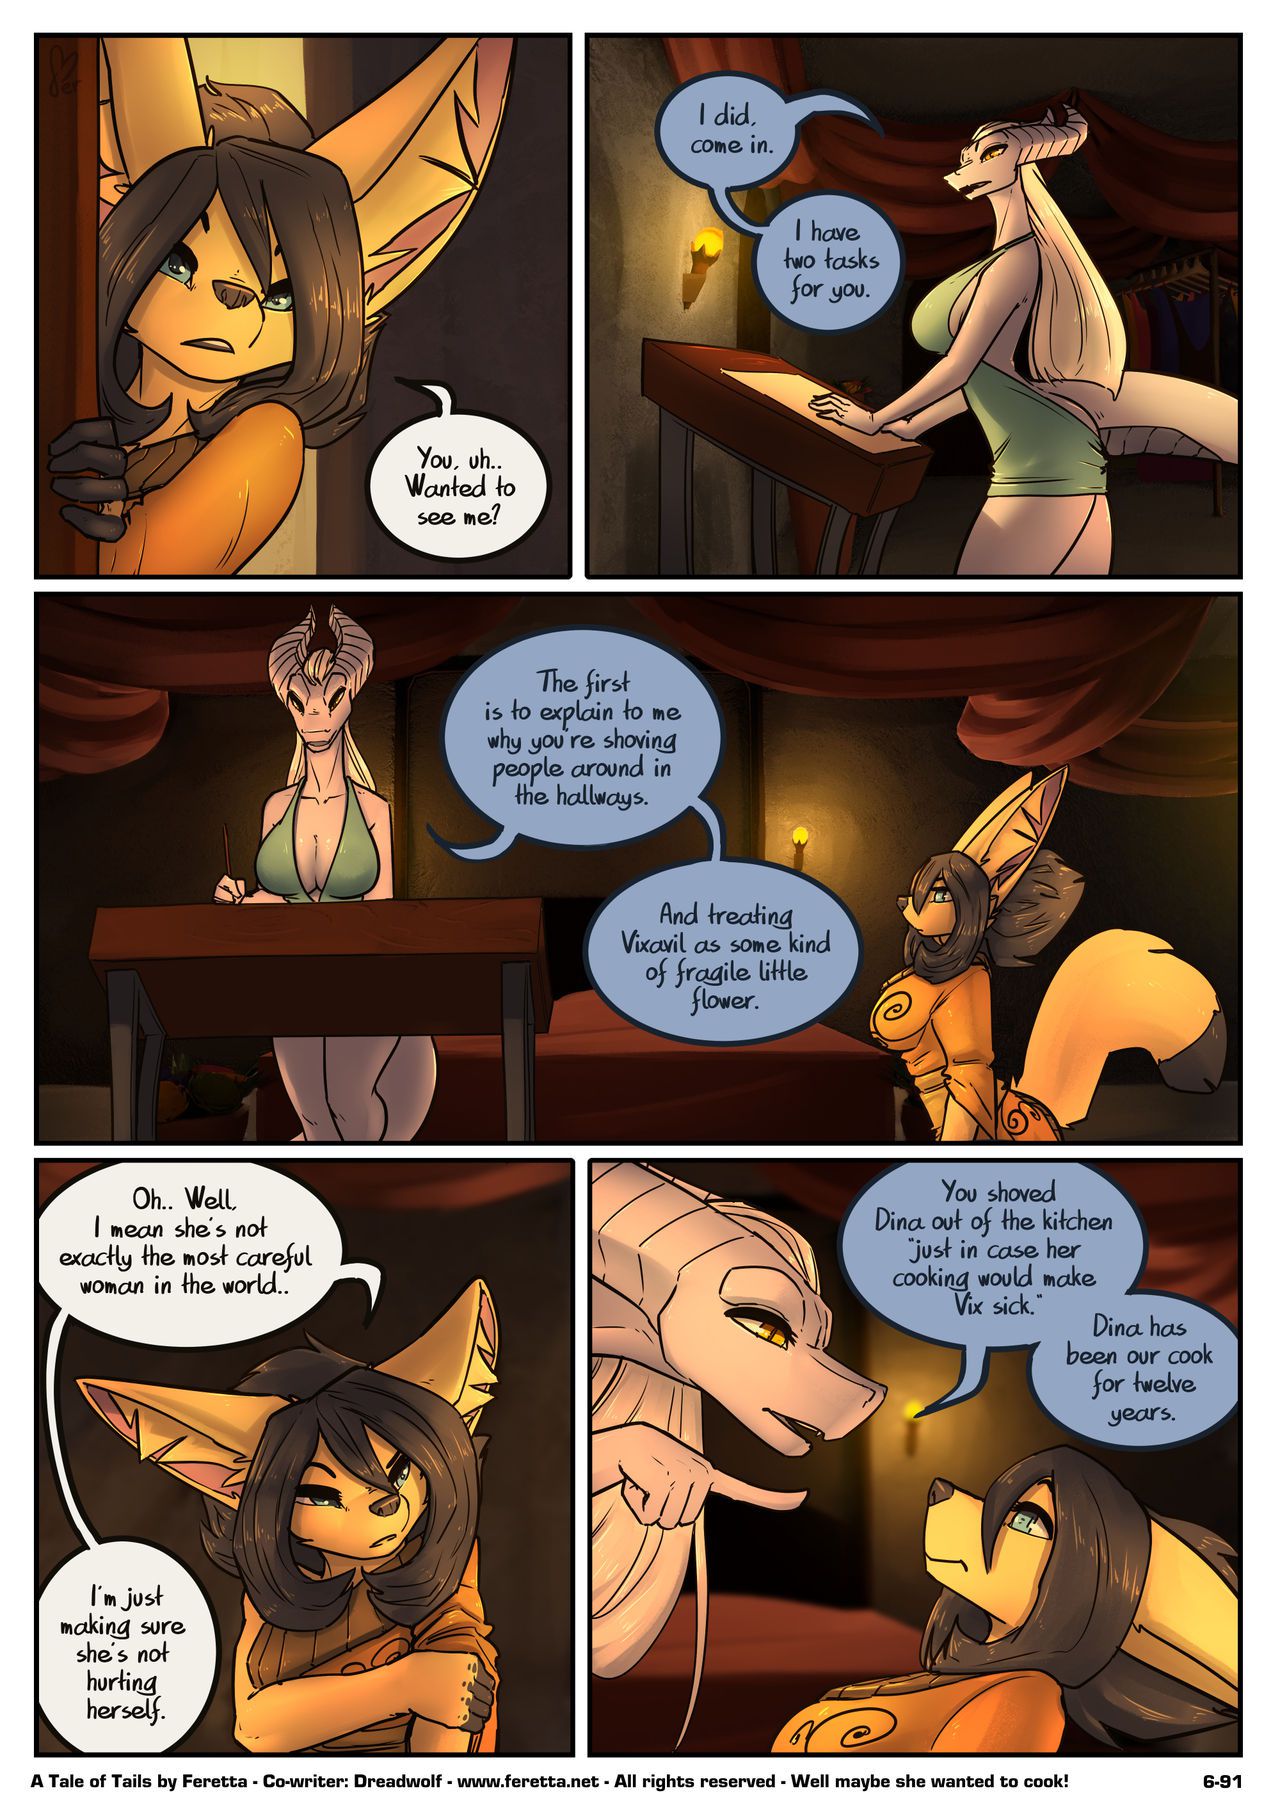 [Feretta] Farellian Legends: A Tale of Tails (w/Extras) [Ongoing] 386